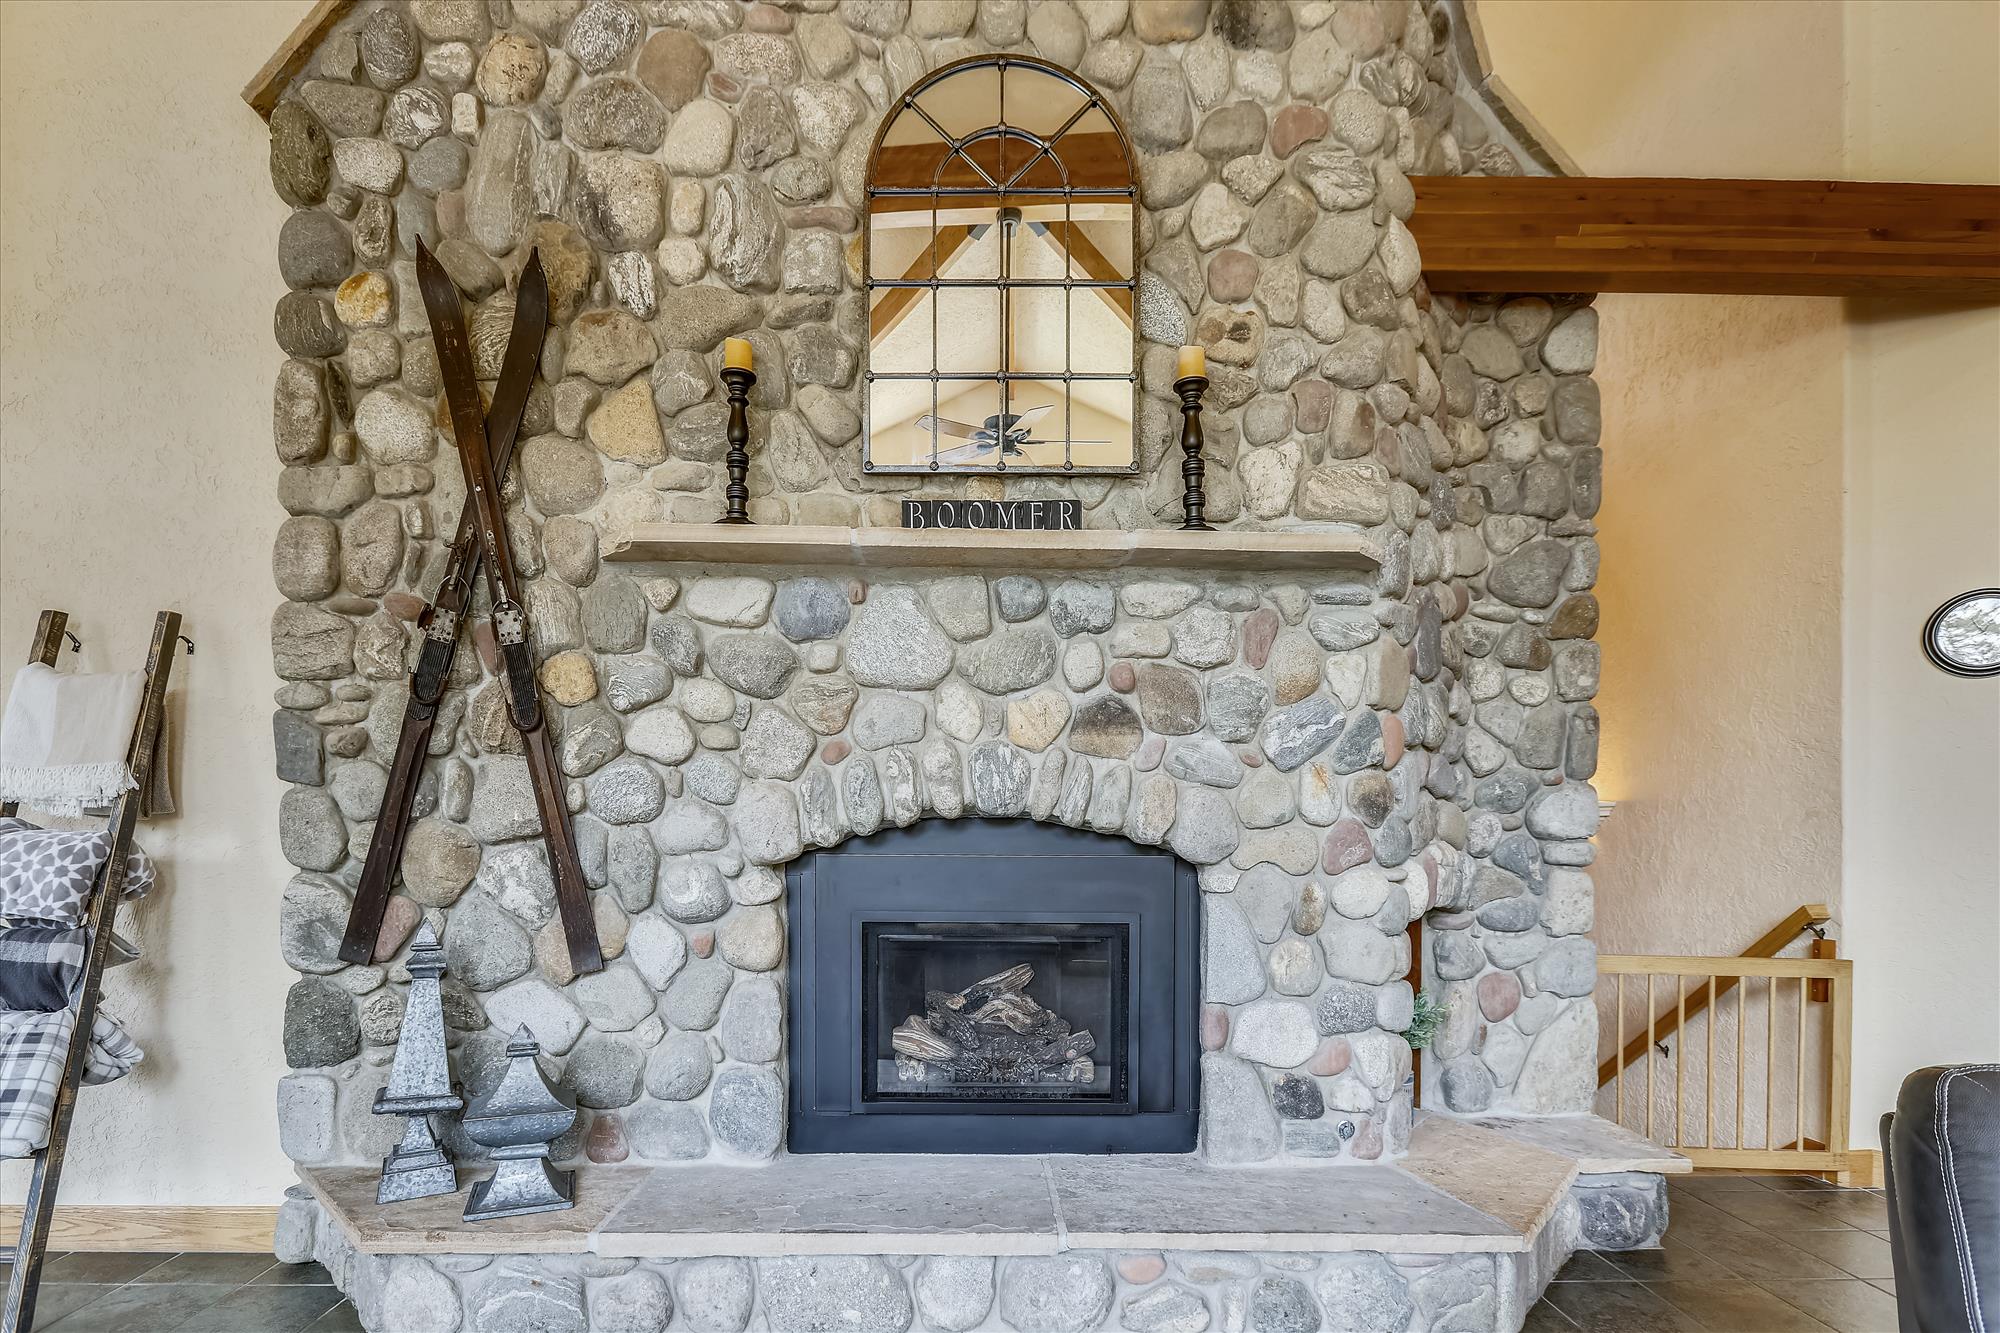 Additional view of the gas fireplace - Evergreen Lodge Breckenridge Vacation Rental